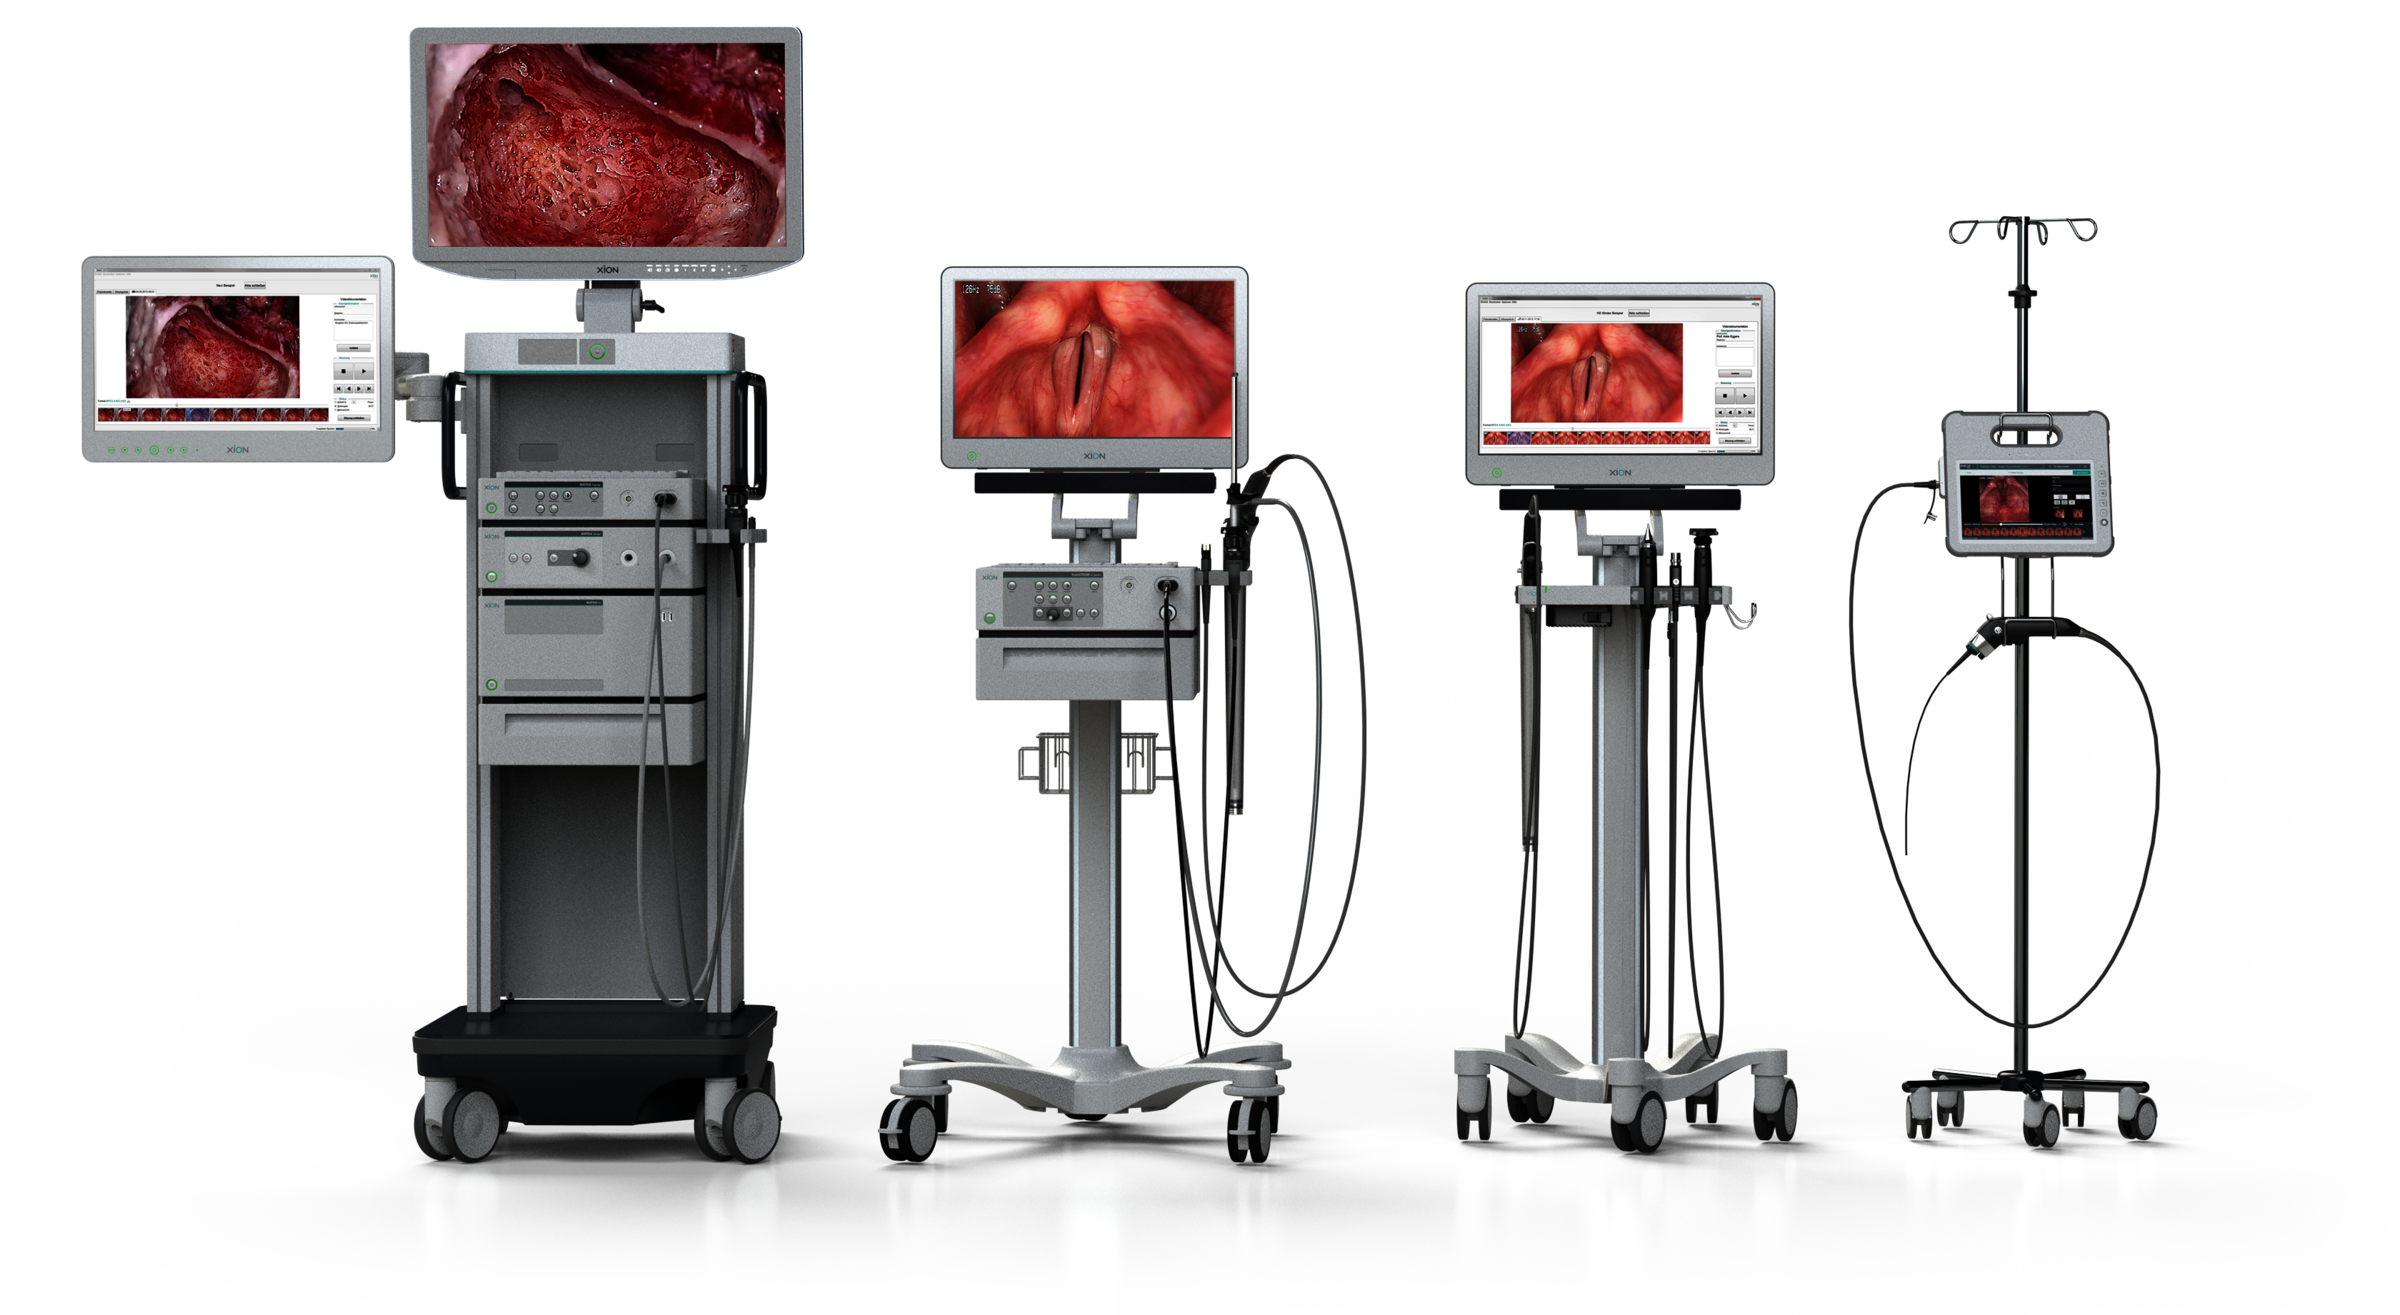 System solutions for endoscopy